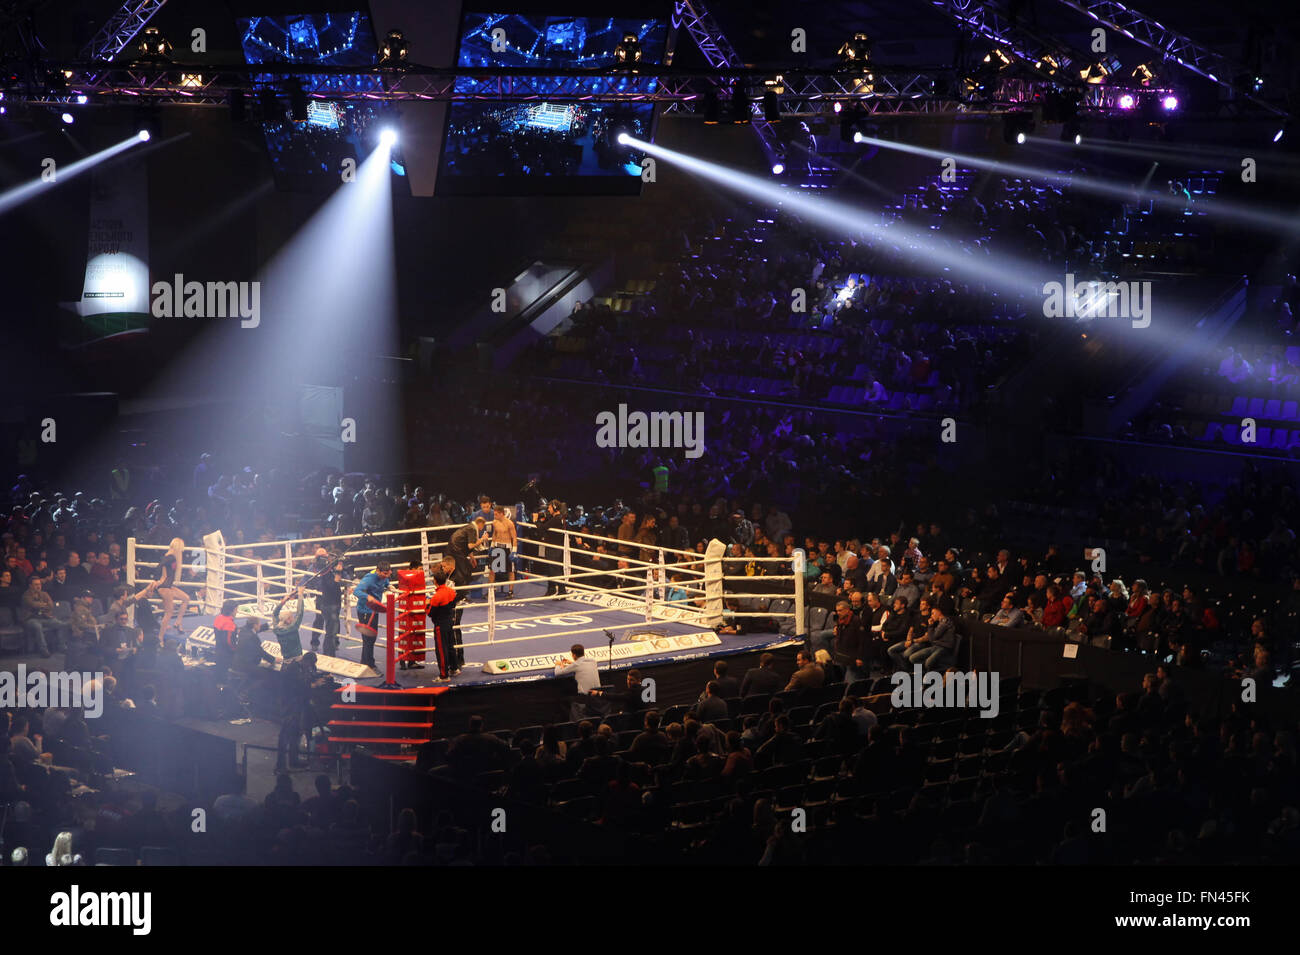 KYIV, UKRAINE - DECEMBER 13, 2014: Boxing ring in Palace of Sports in Kyiv during 'Evening of Boxing' Stock Photo